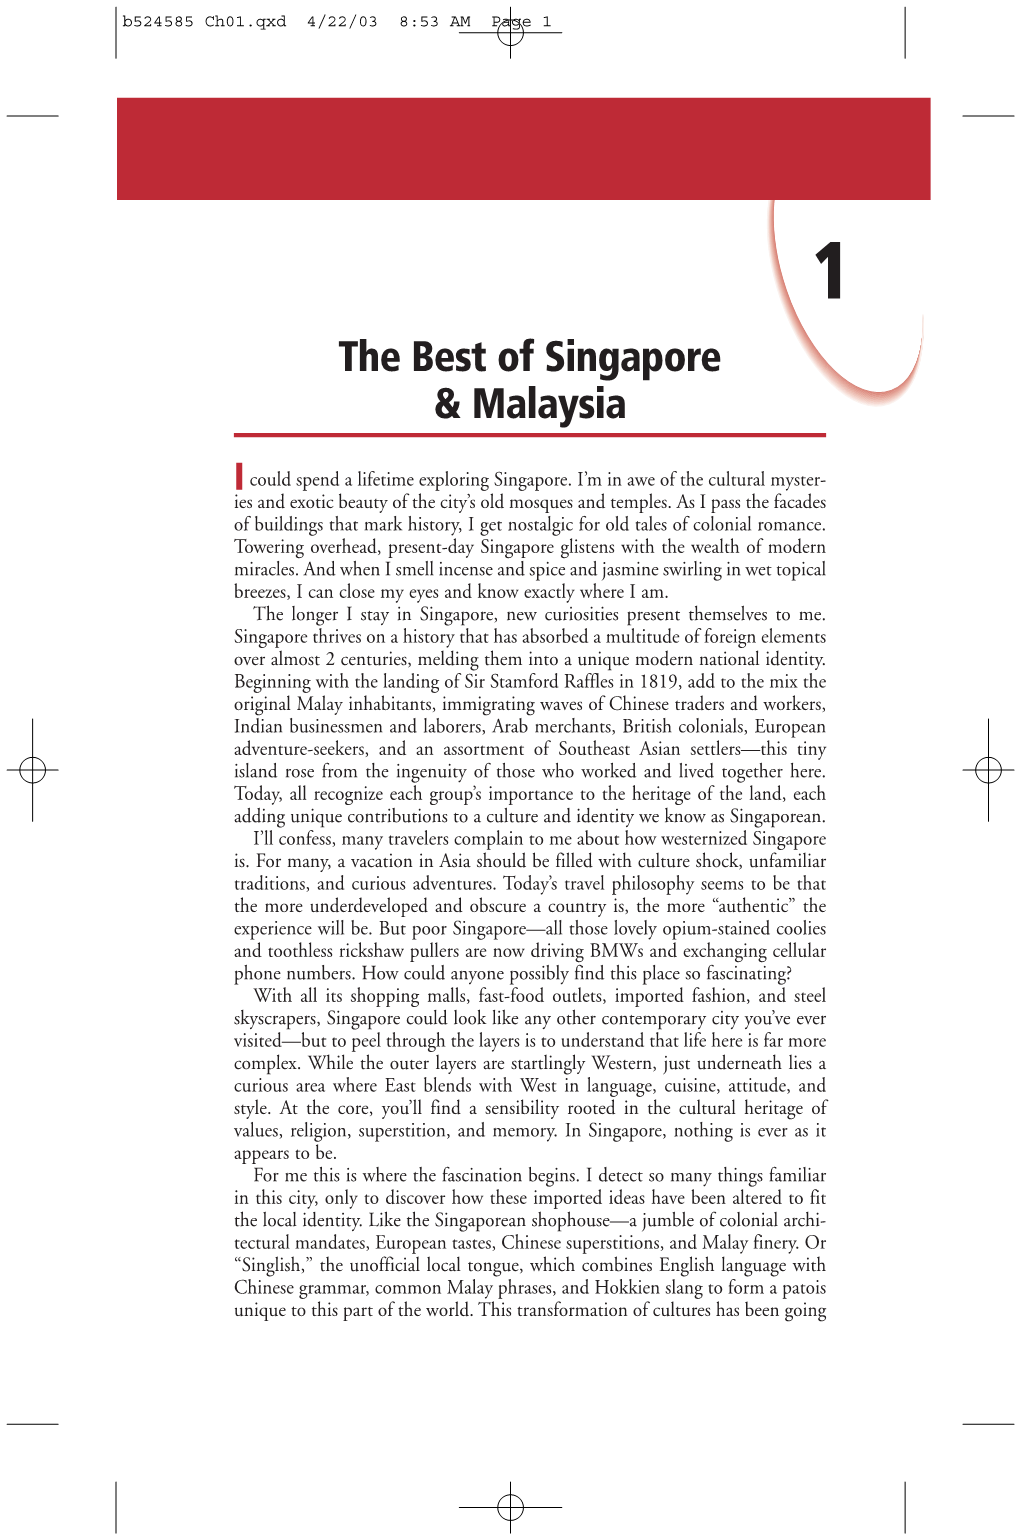 The Best of Singapore & Malaysia